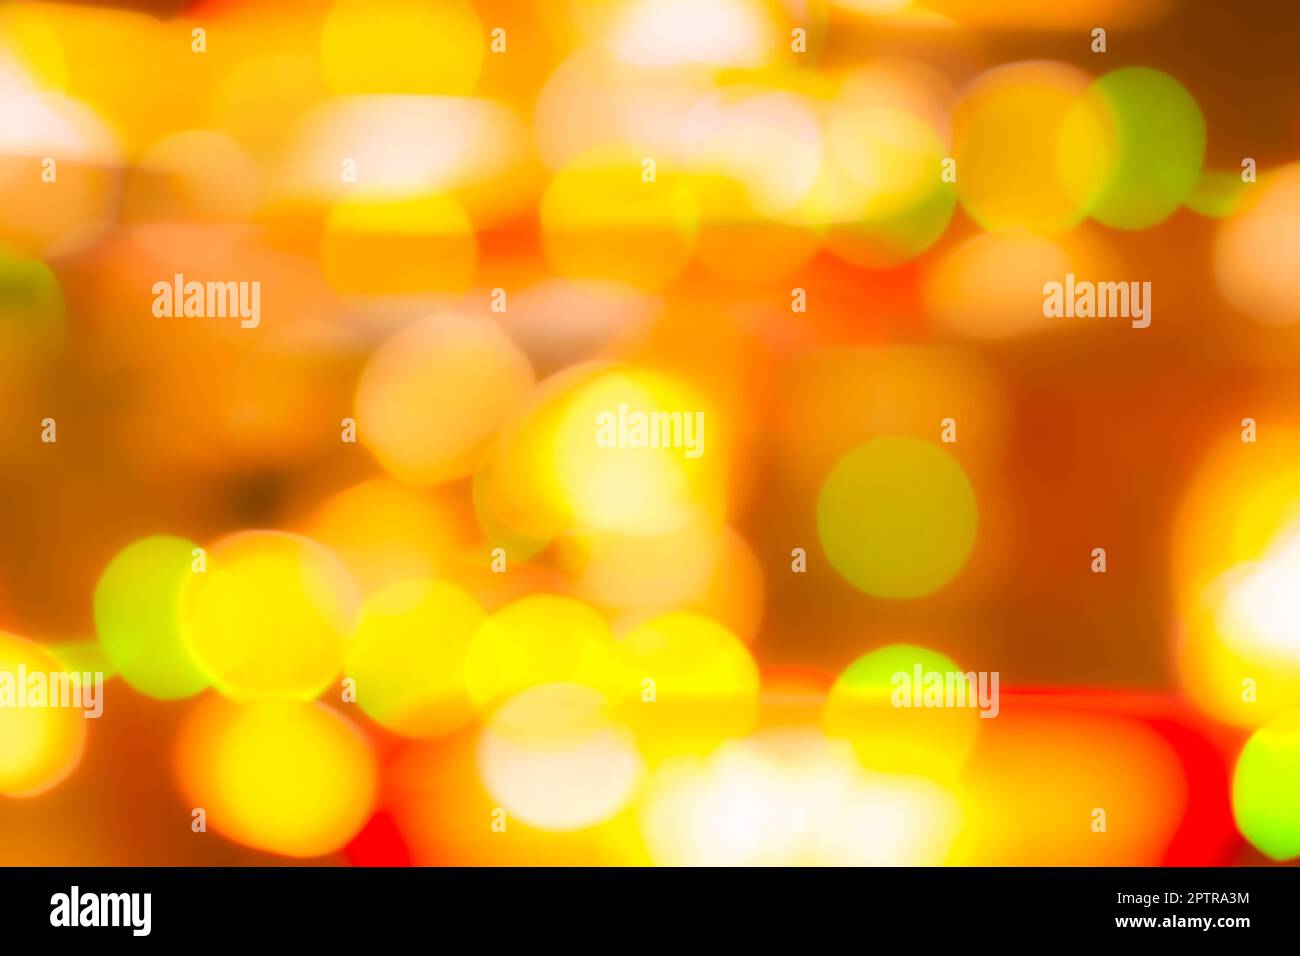 Blur gold, green, and red color bokeh background. Blur abstract background for Christmas day. Light with a beautiful pattern of round bokeh. Orange fe Stock Photo